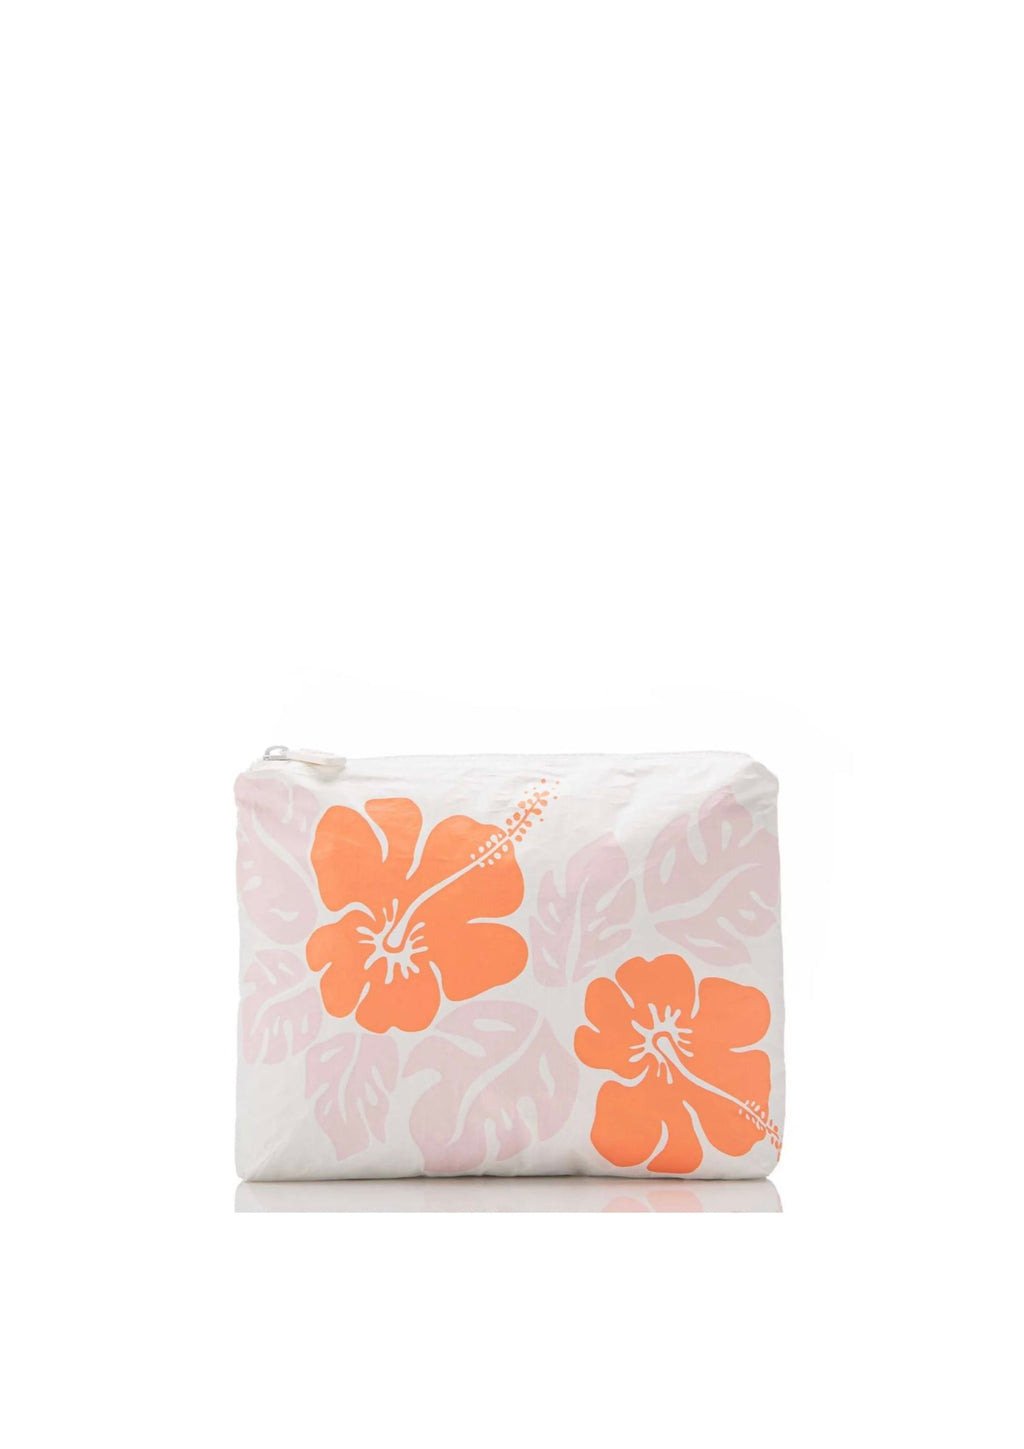 Aloha Small Pouch - Big Island Hibiscus A nod to vintage Hawaiiana, this design will keep your bikinis, belongings, and beach days Splash-Proof and your island dreams alive with the magic of Hawai'i.